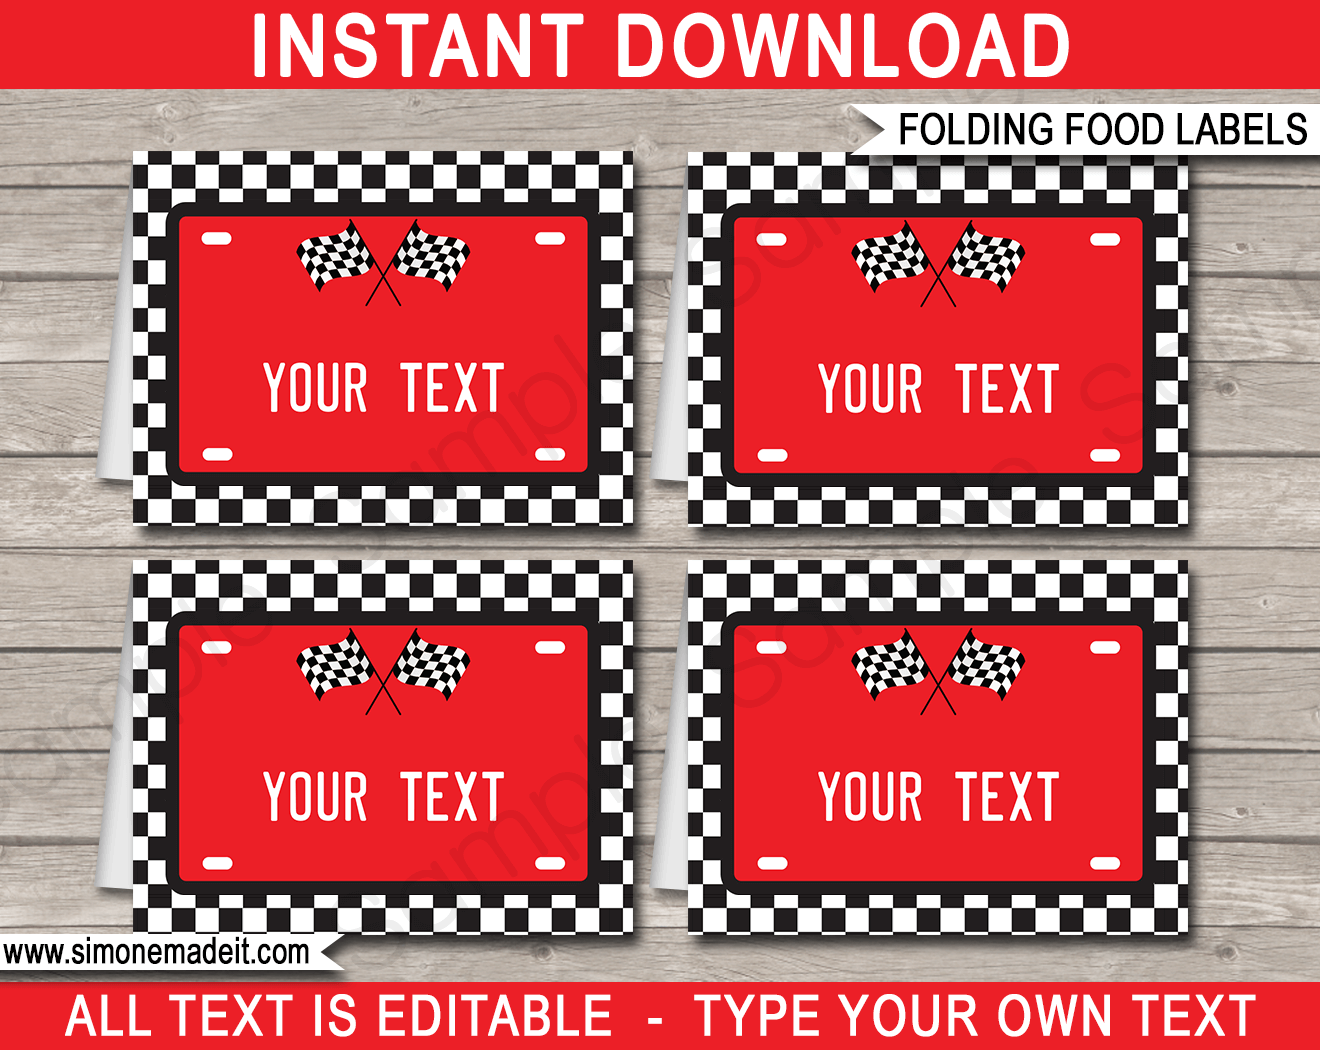 Race Car Party Food Labels | Food Buffet Tags | Place Cards | Birthday Party | Editable DIY Template | $3.00 INSTANT DOWNLOAD via SIMONEmadeit.com